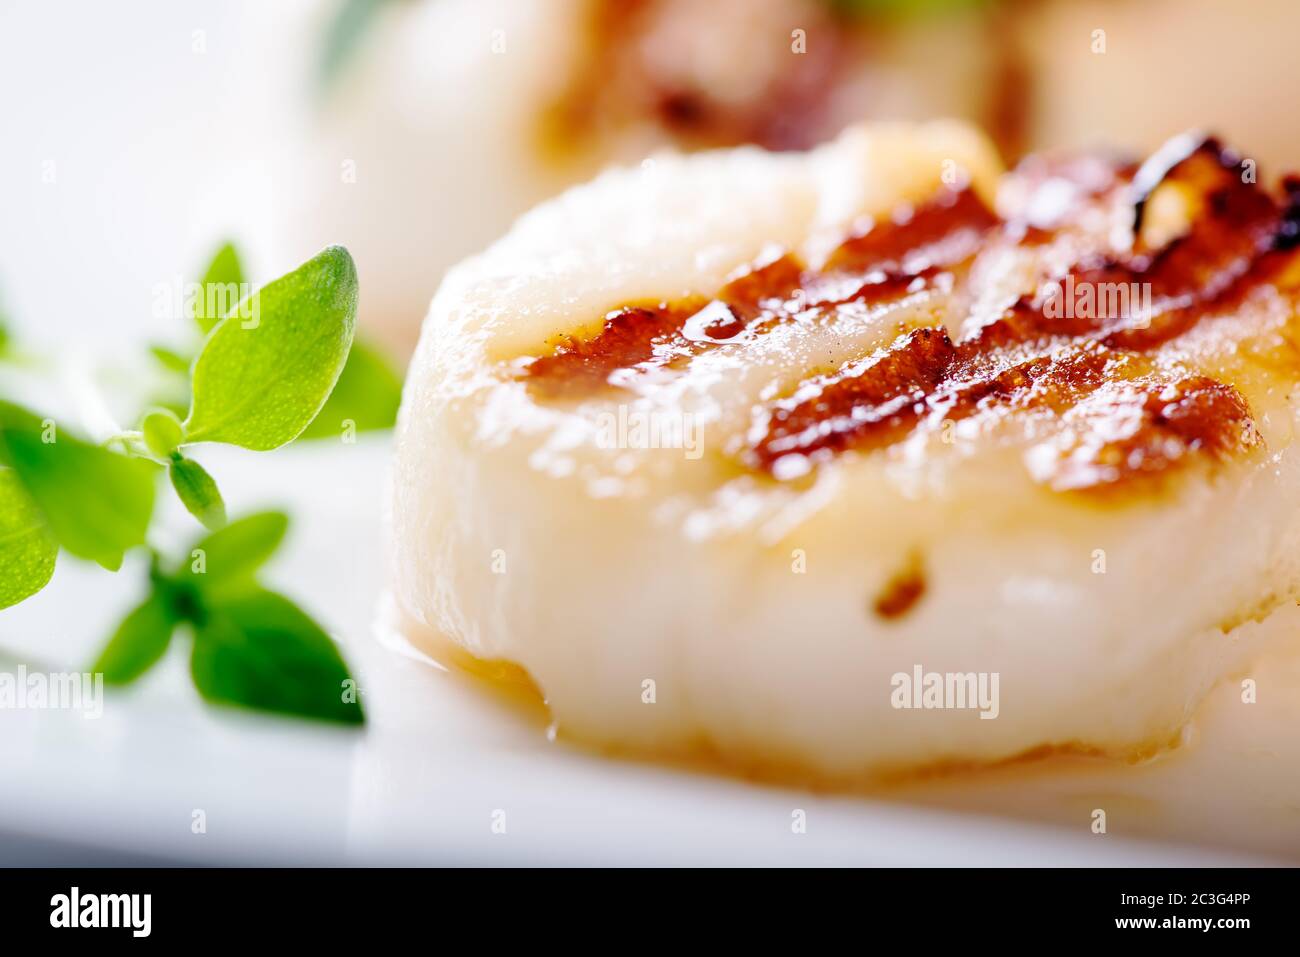 Grilled scallops with thyme leafs Stock Photo